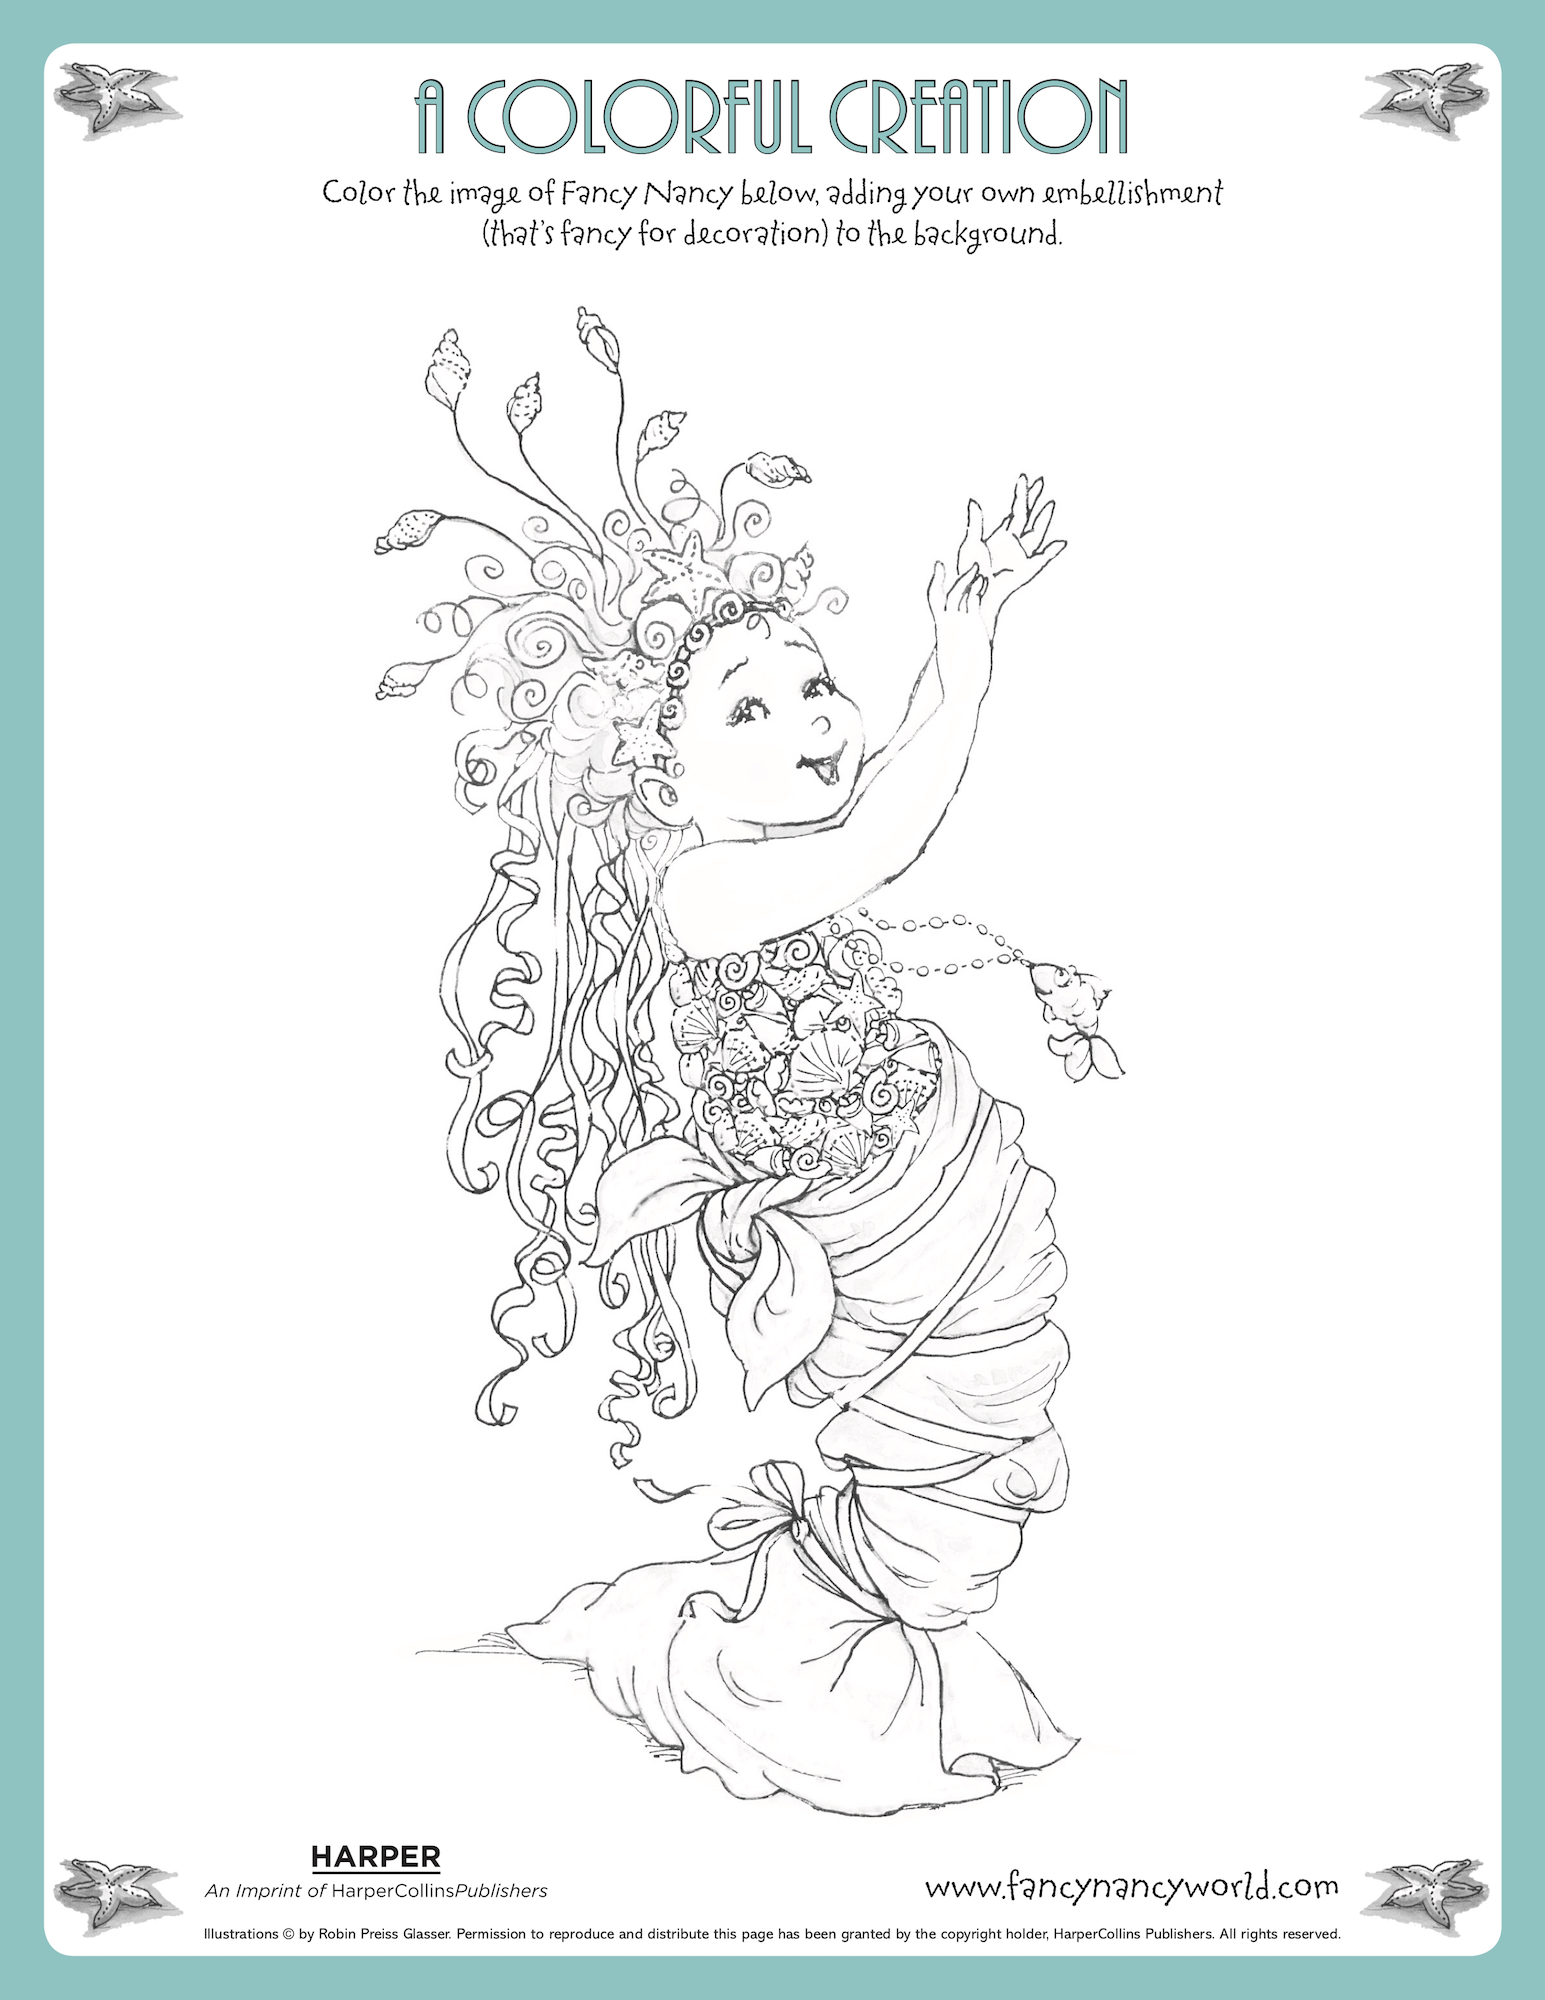 Free Fancy Nancy mermaid ballet coloring page for kids to color from the new Disney Jr. show.